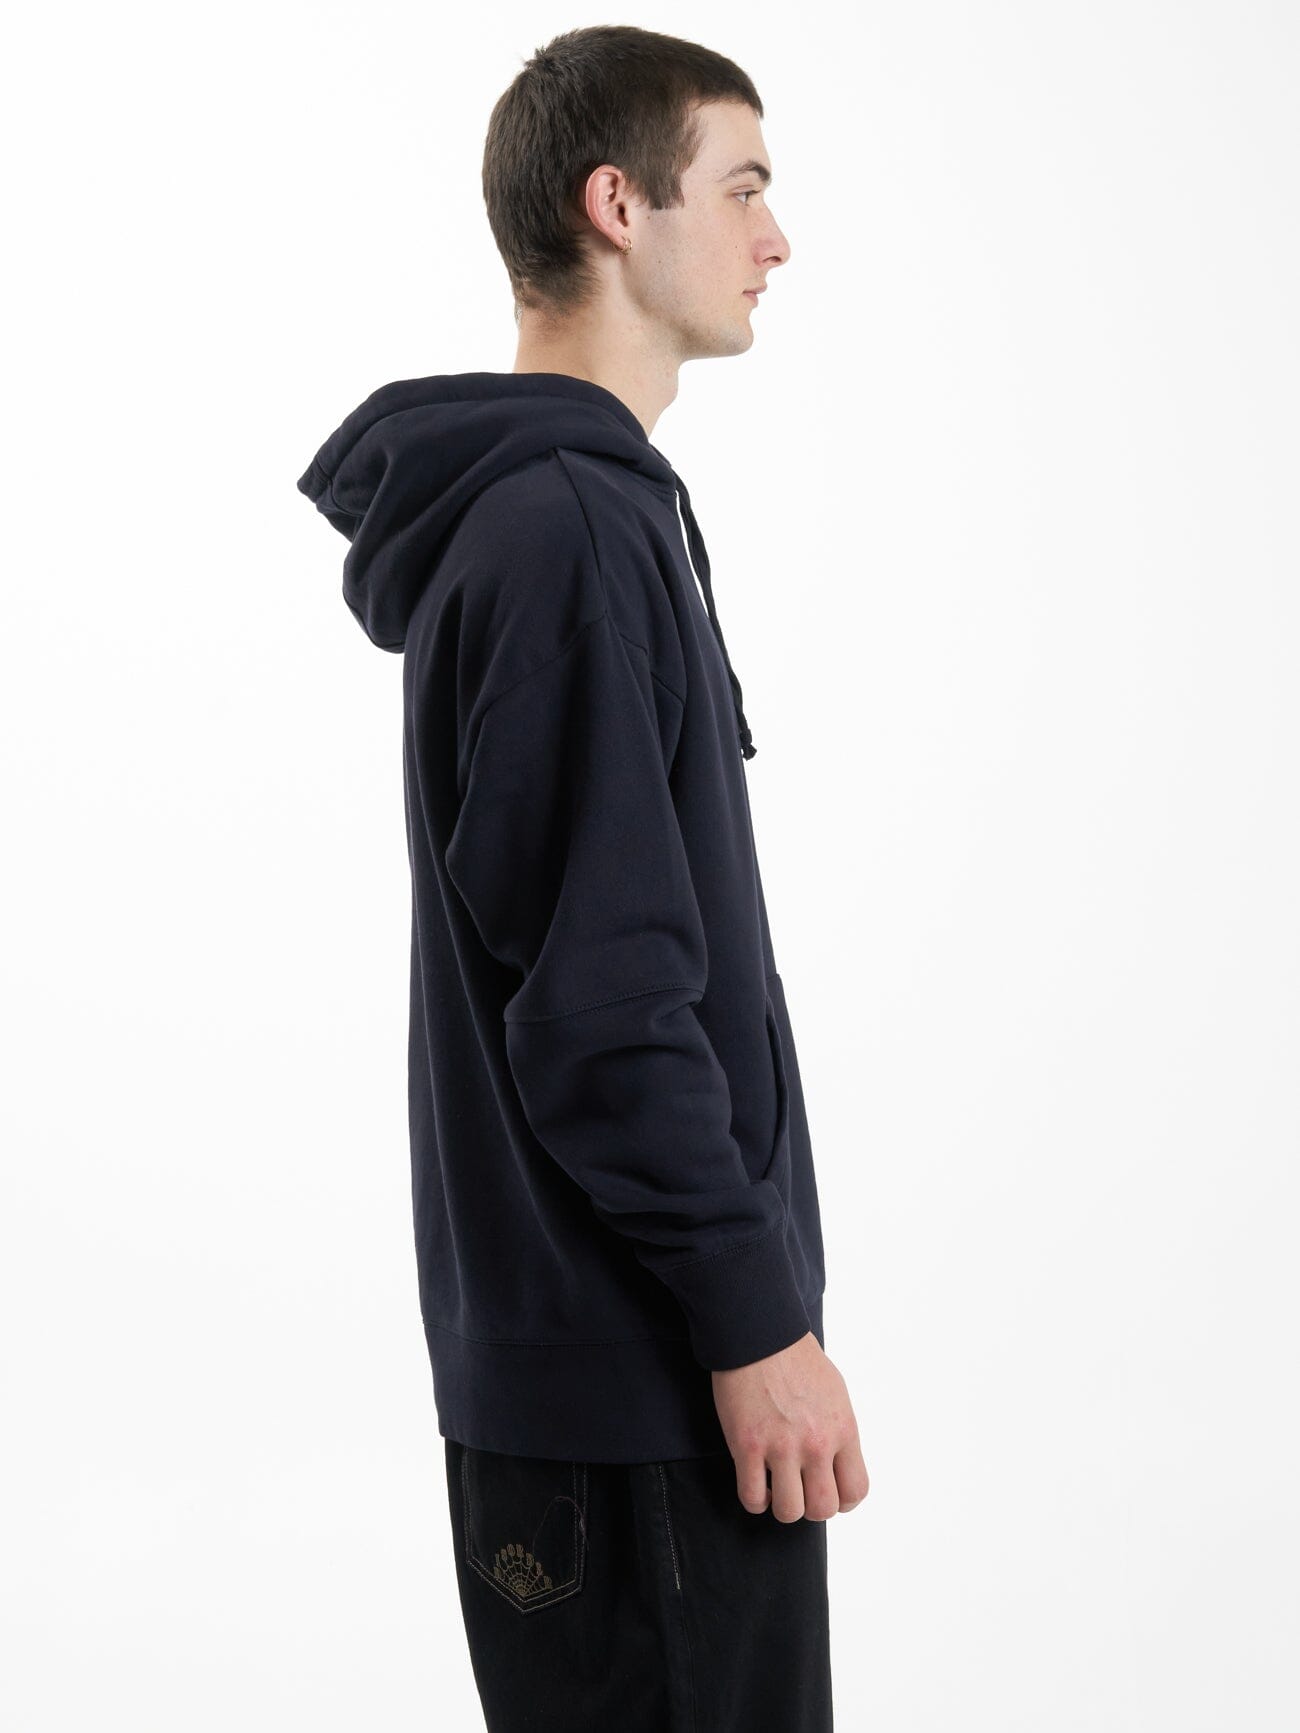 Thou Shall Not Slouch Hood - Midnight Blue